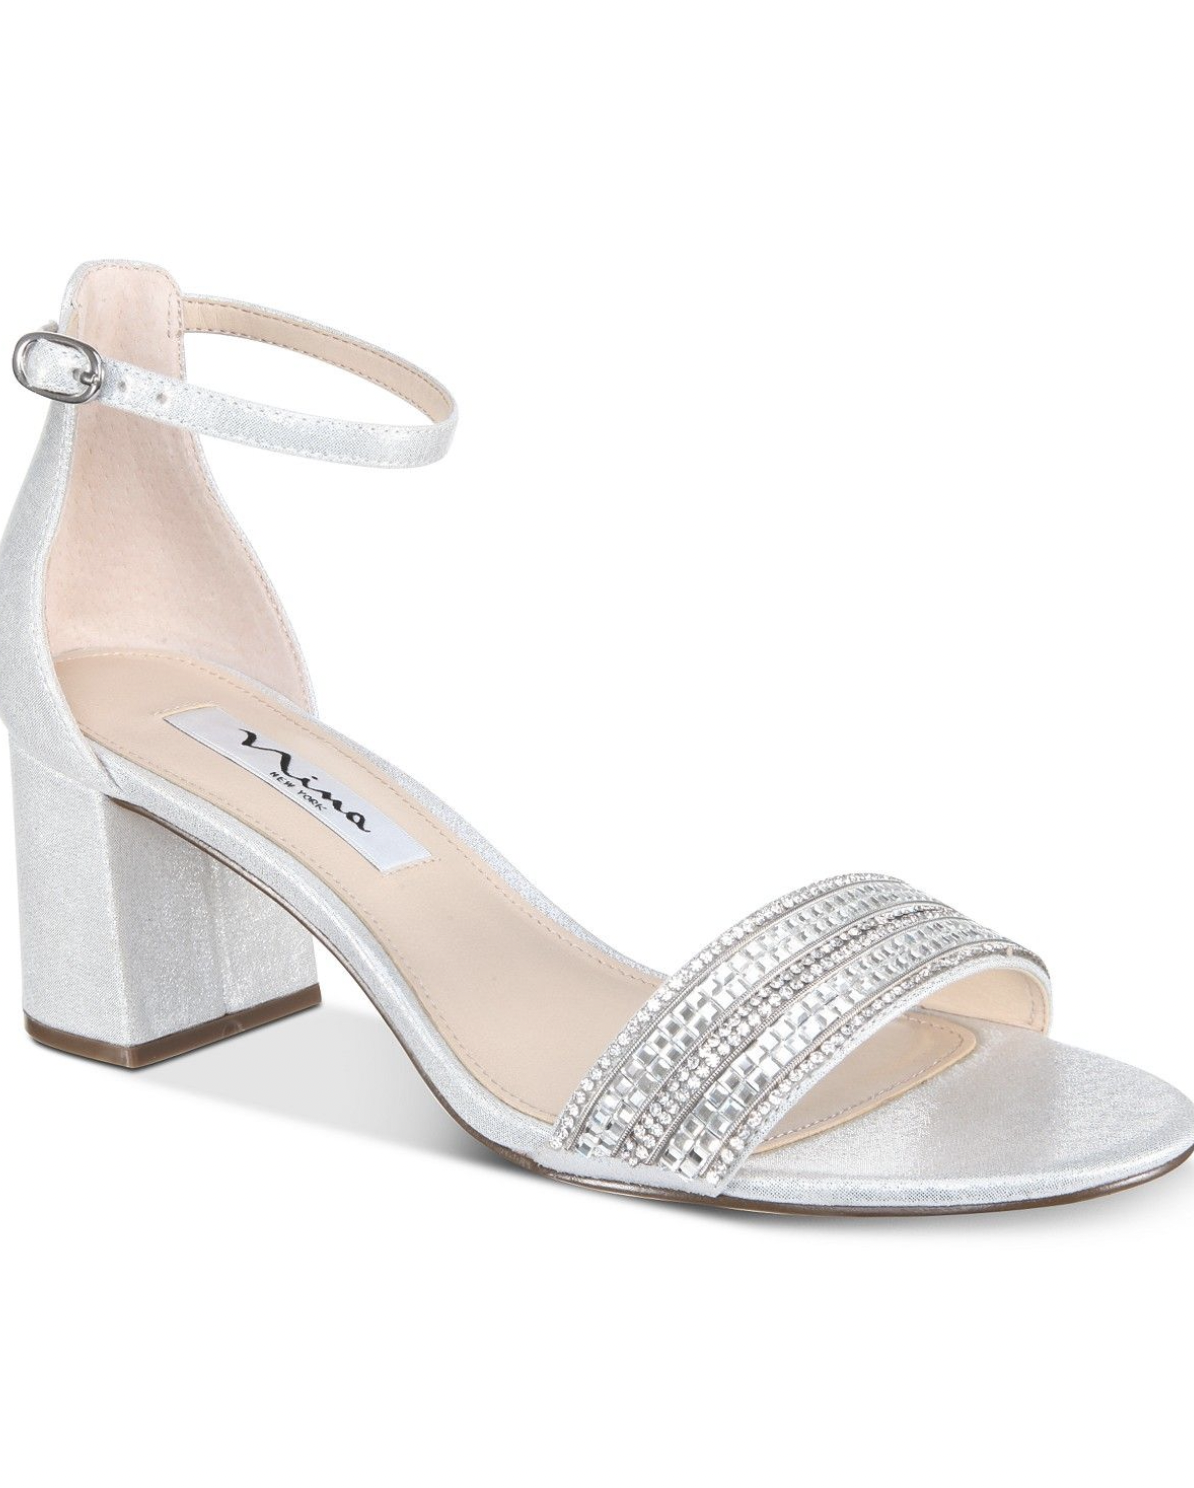 Bridal | Ally Shoes | Comfortable Wedding Shoes